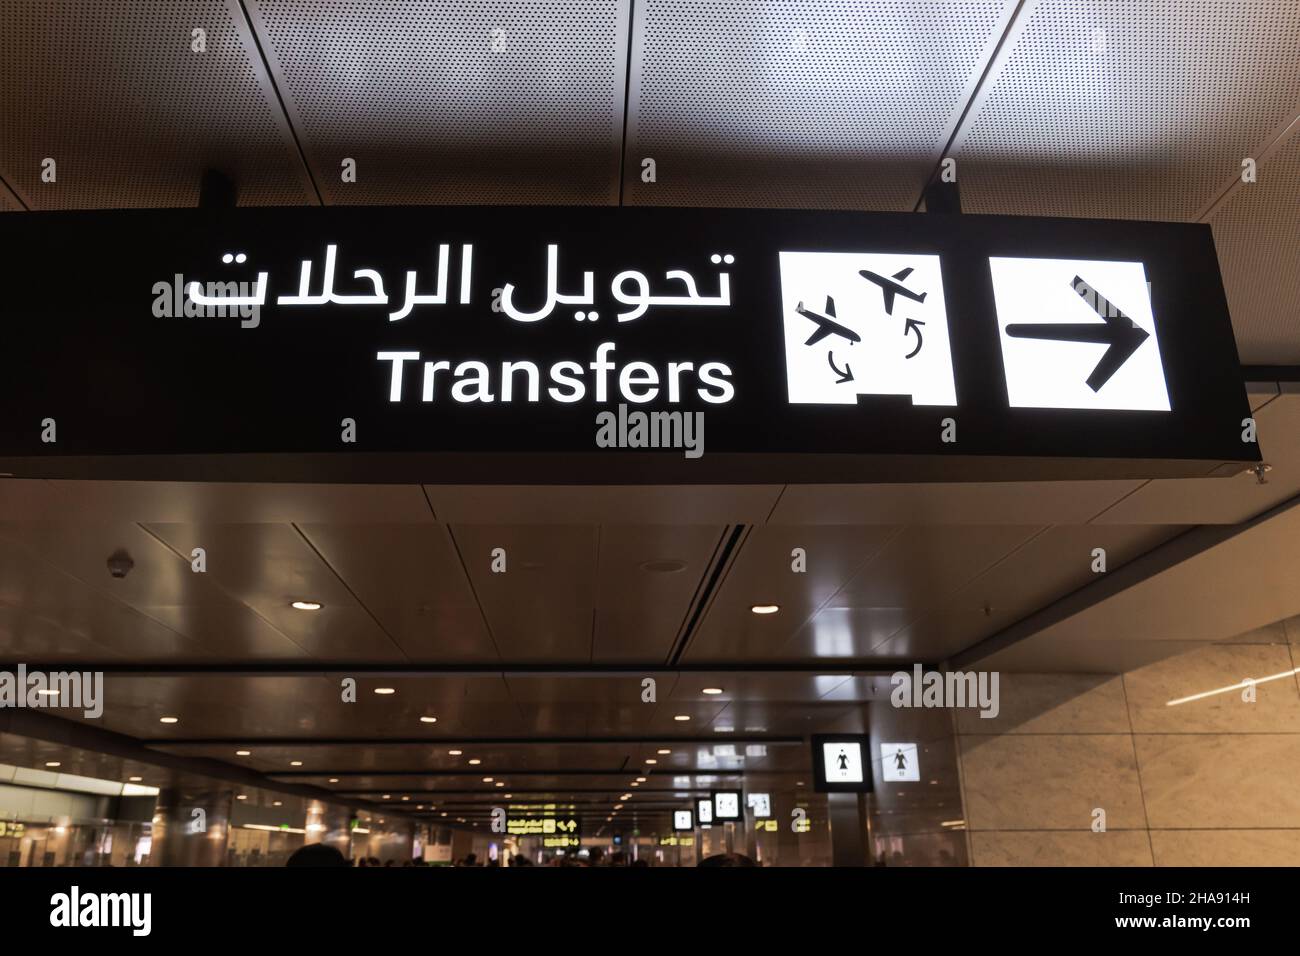 Flight transfer sign in airport written in English and Arabic Stock Photo